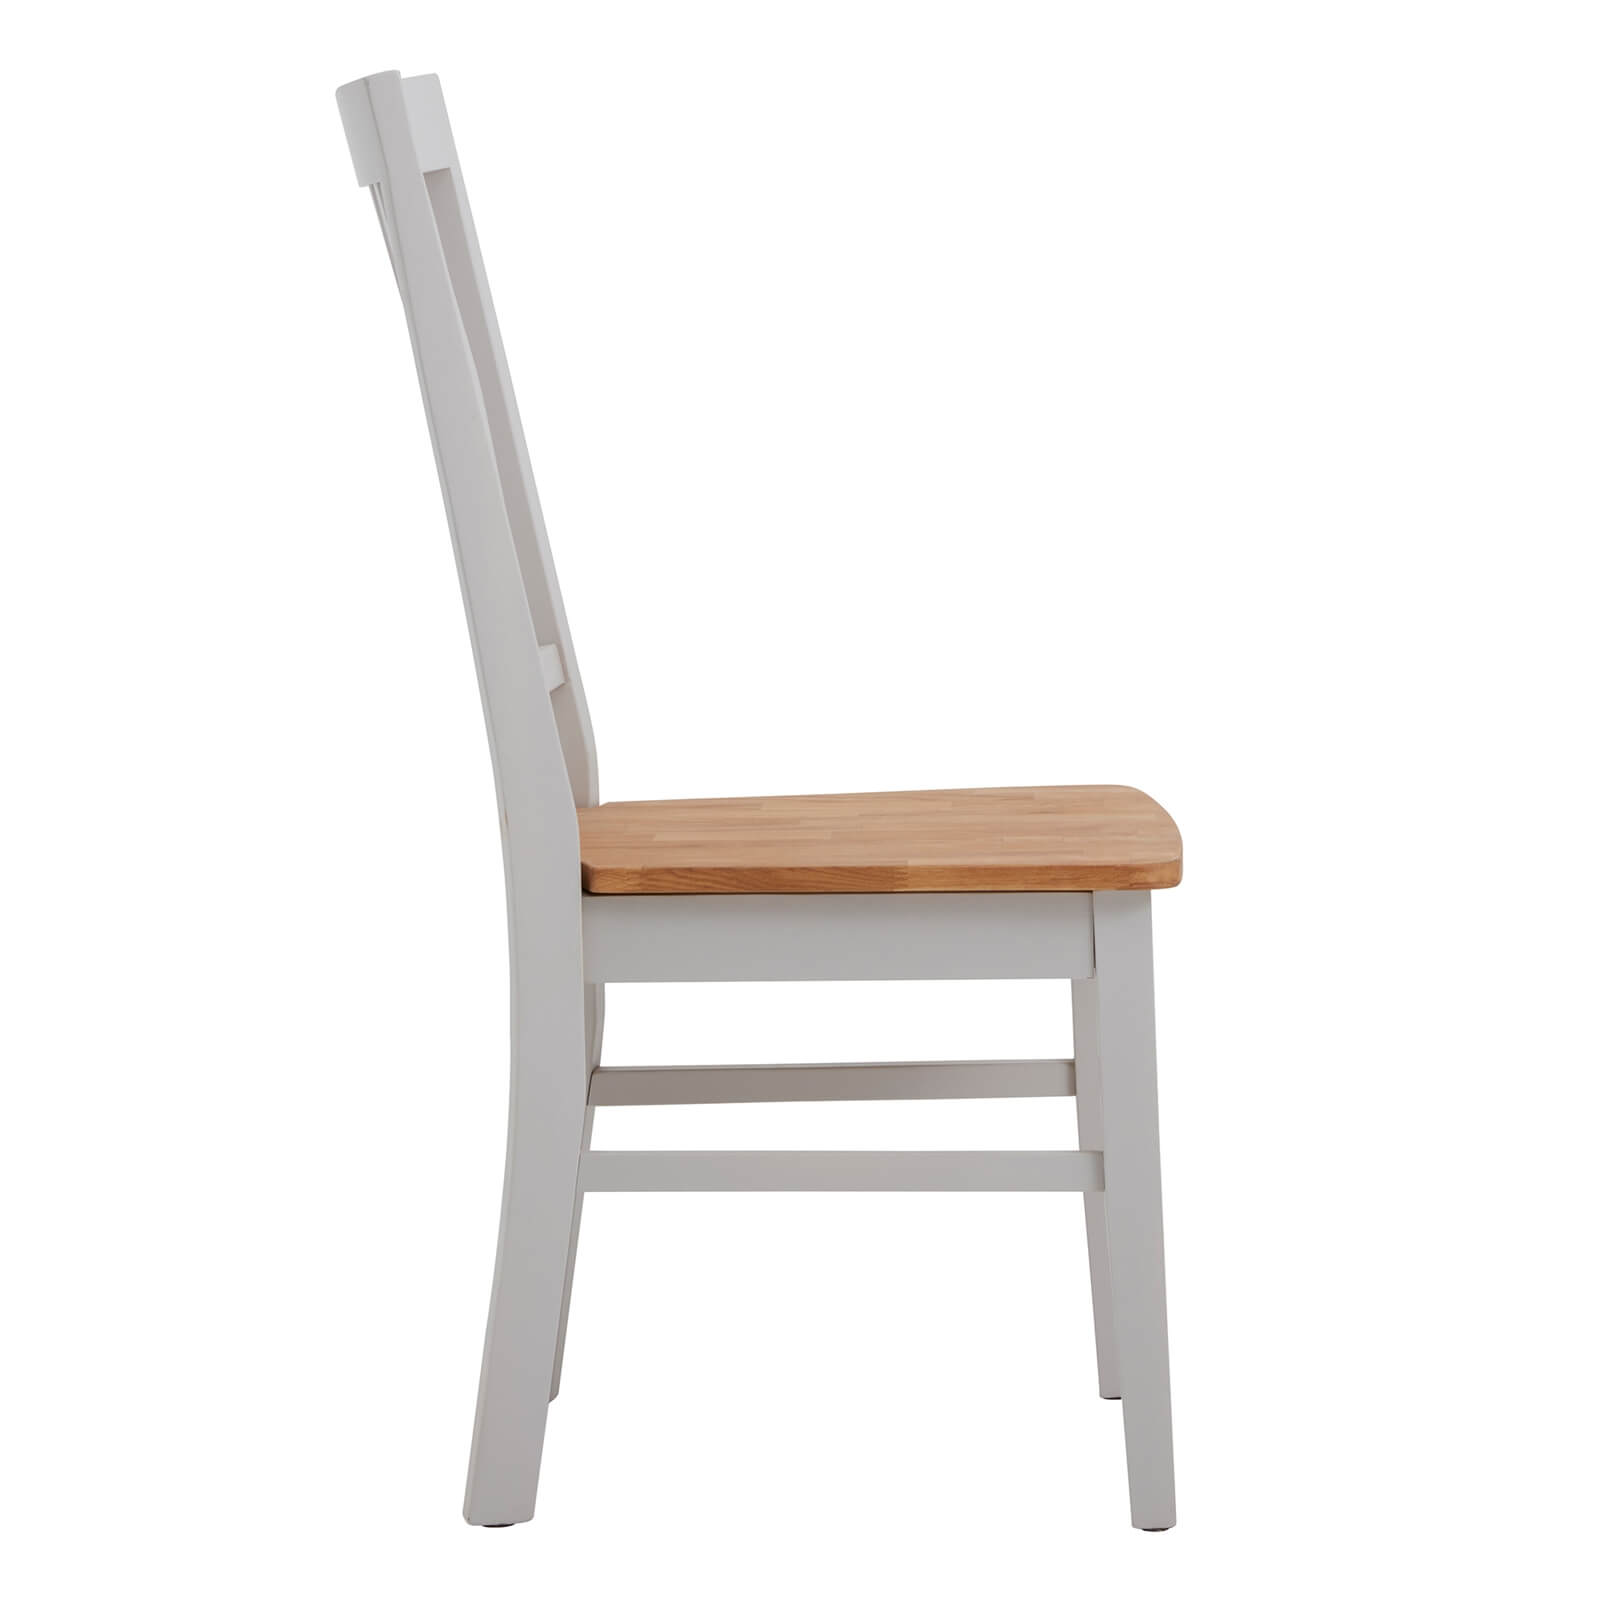 Henlow Solid Wood Dining Chair - Set of 2